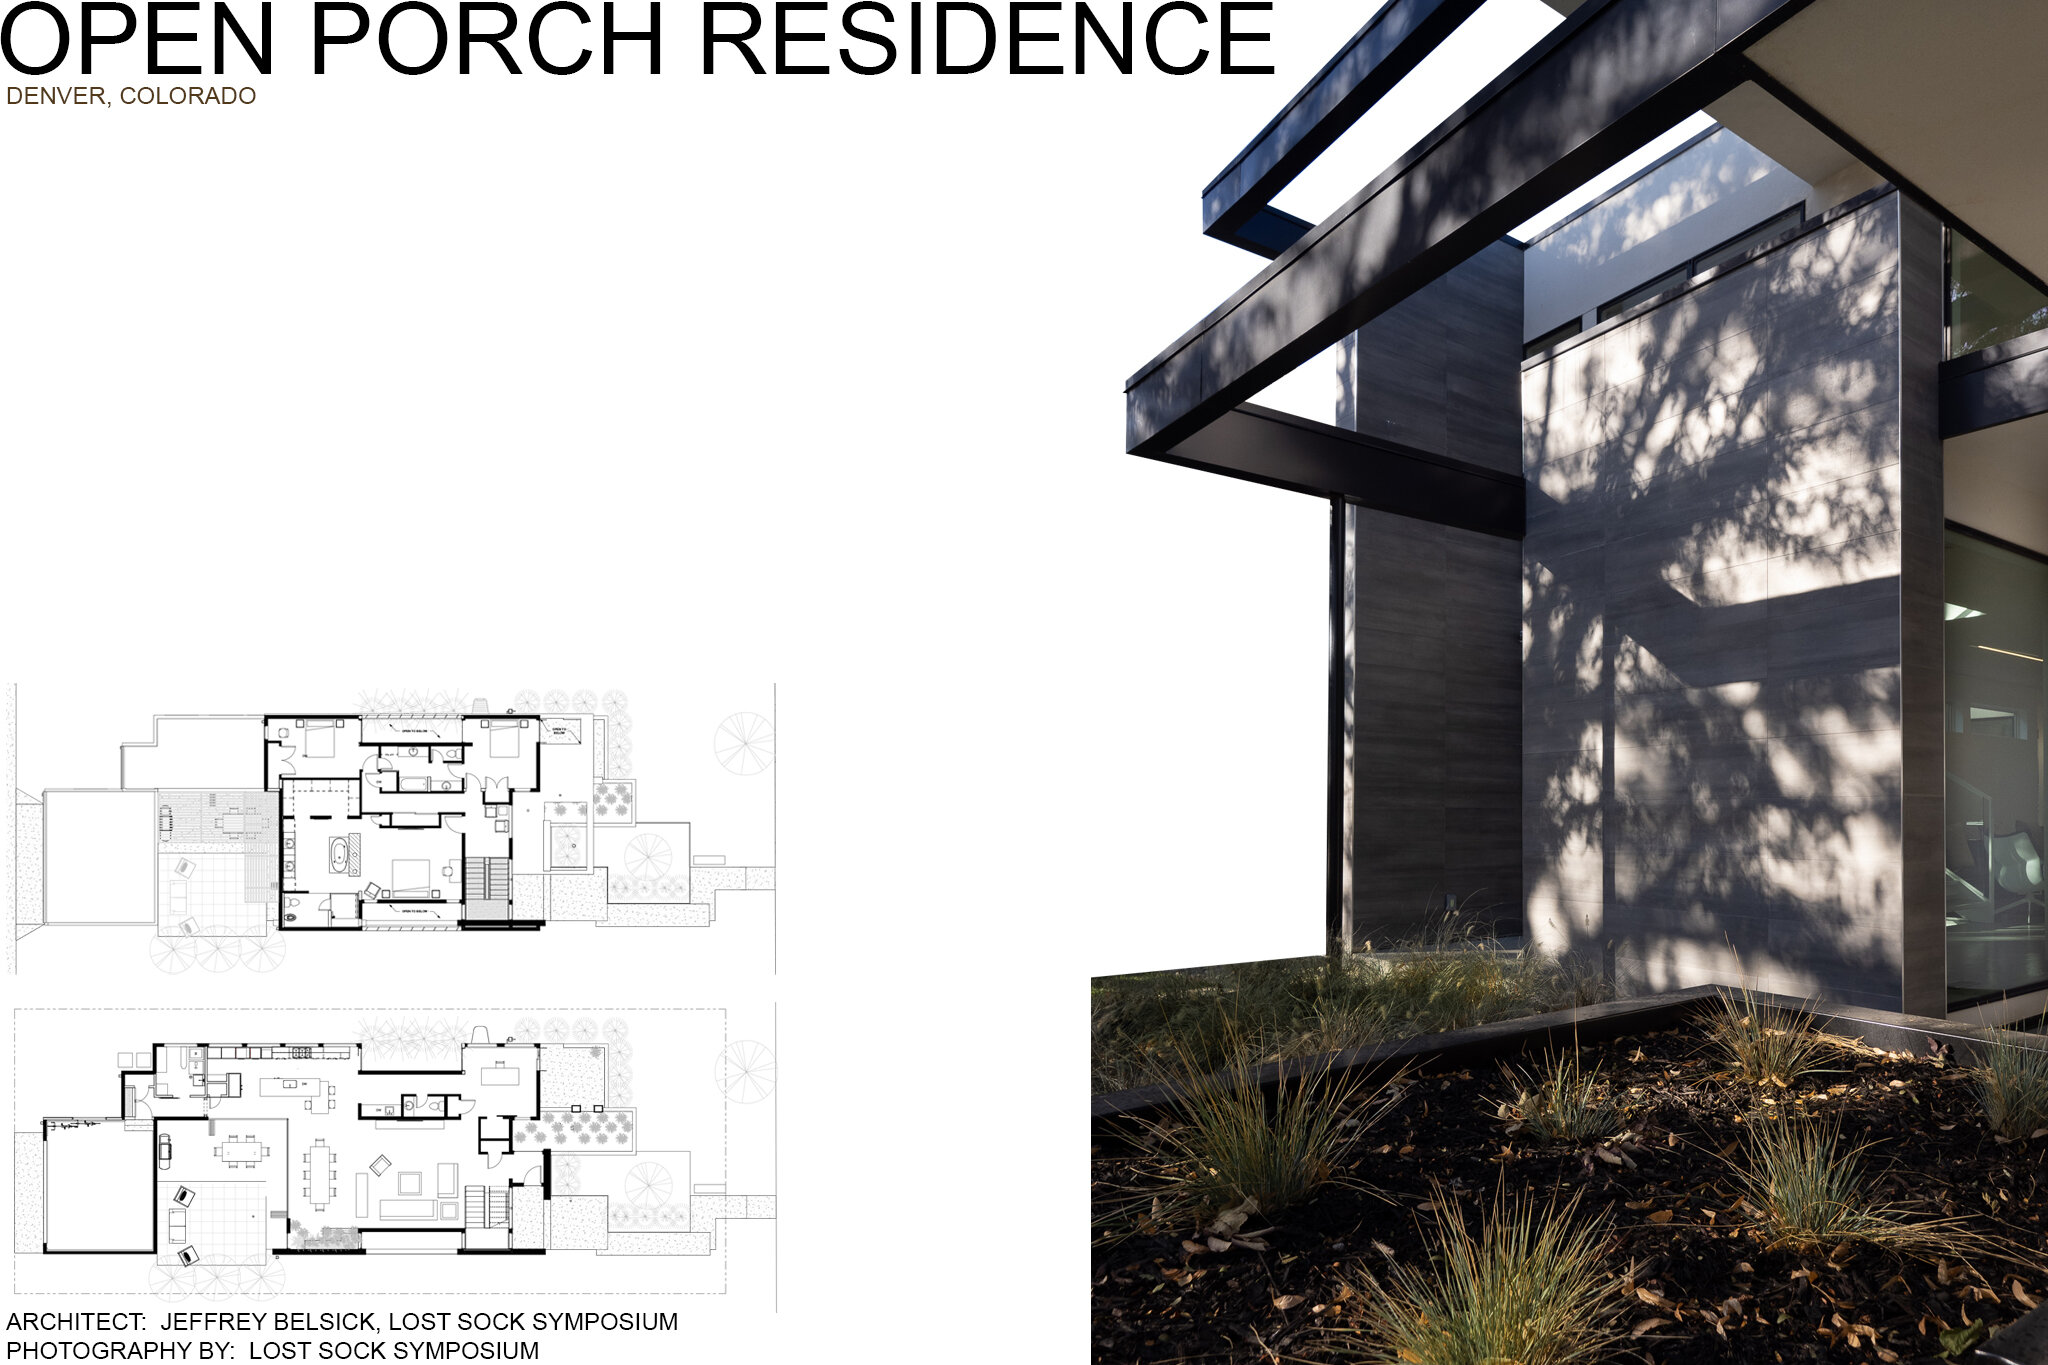 OPEN PORCH RESIDENCE